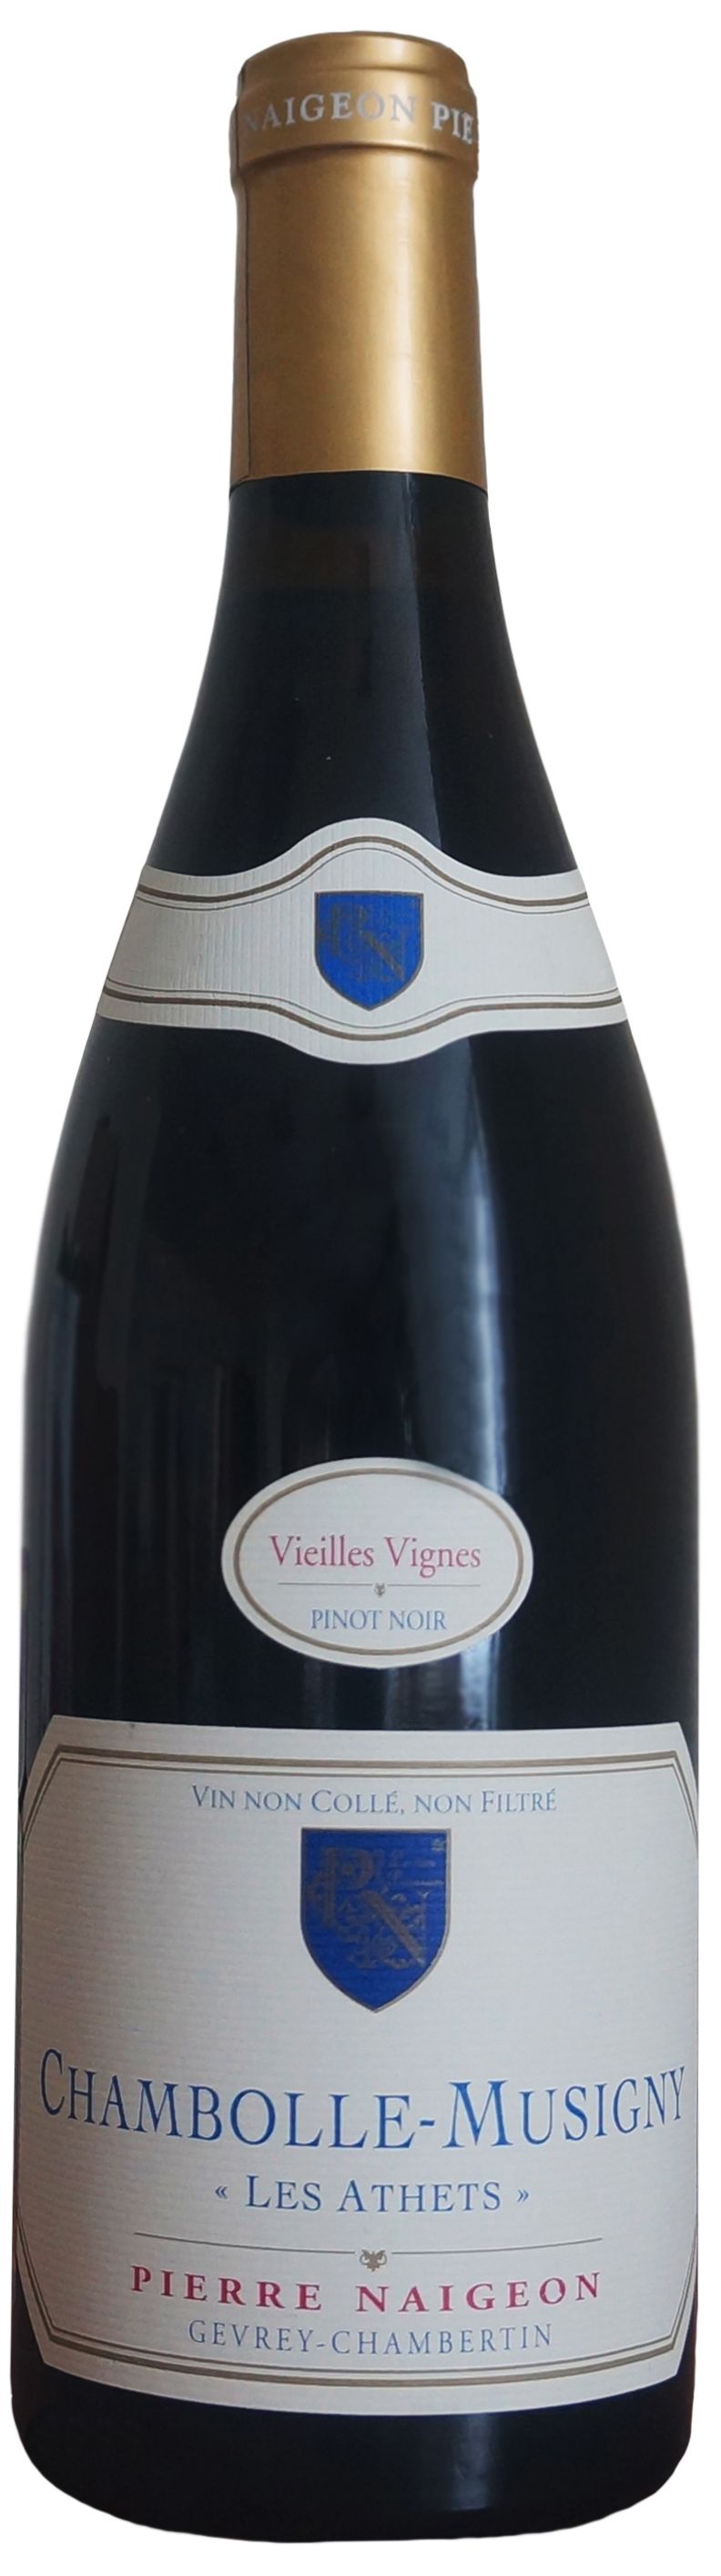 Pierre Naigeon, Chambolle-Musigny Les Athets Vieilles Vignes, 2014